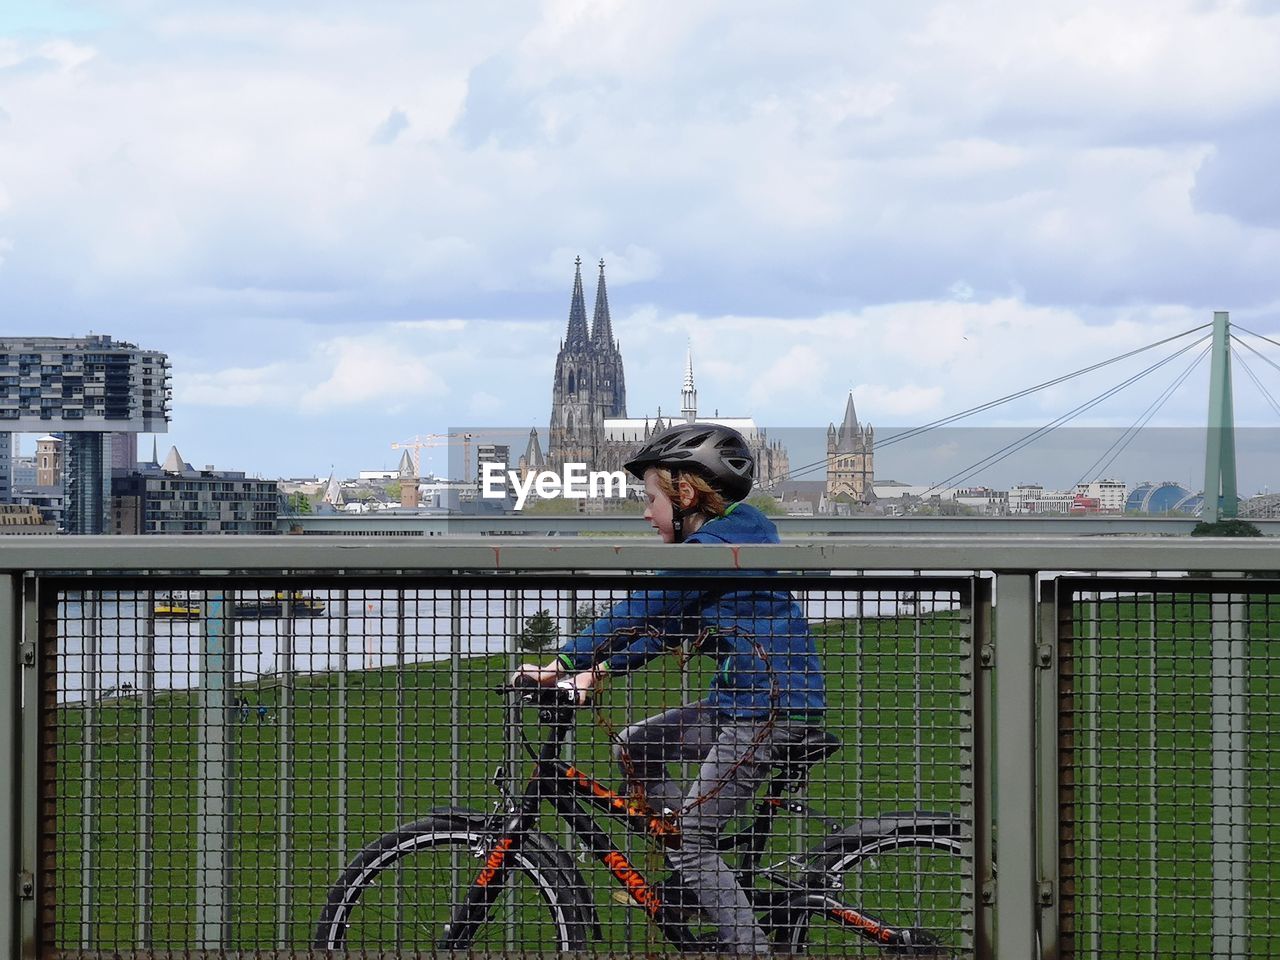 MAN RIDING BICYCLE ON BRIDGE IN CITY AGAINST SKY